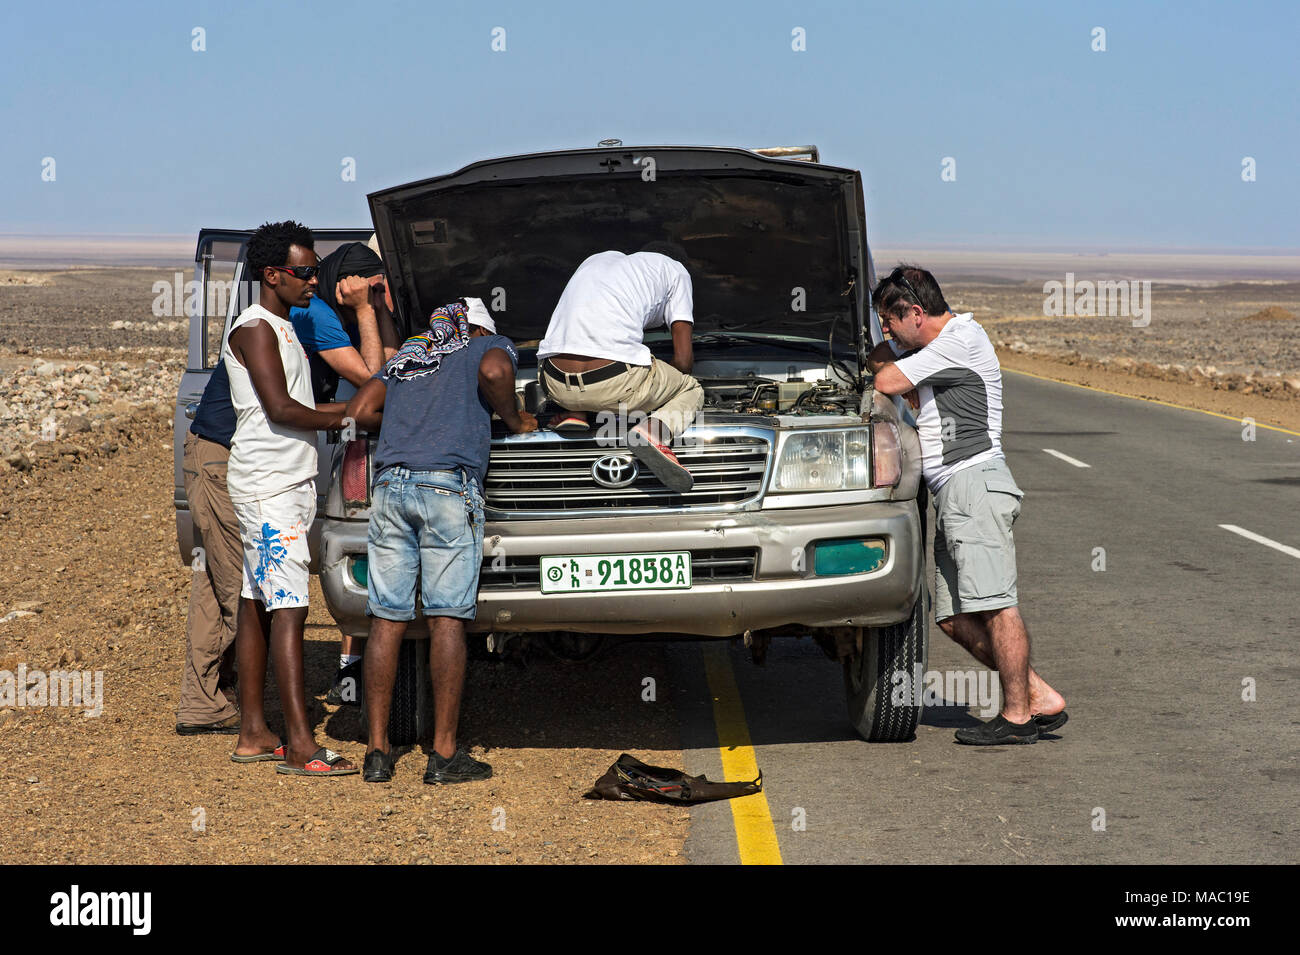 Locals and tourists assisting a car repair on the road in the Danakil depression, Afar Province, Ethiopia Stock Photo